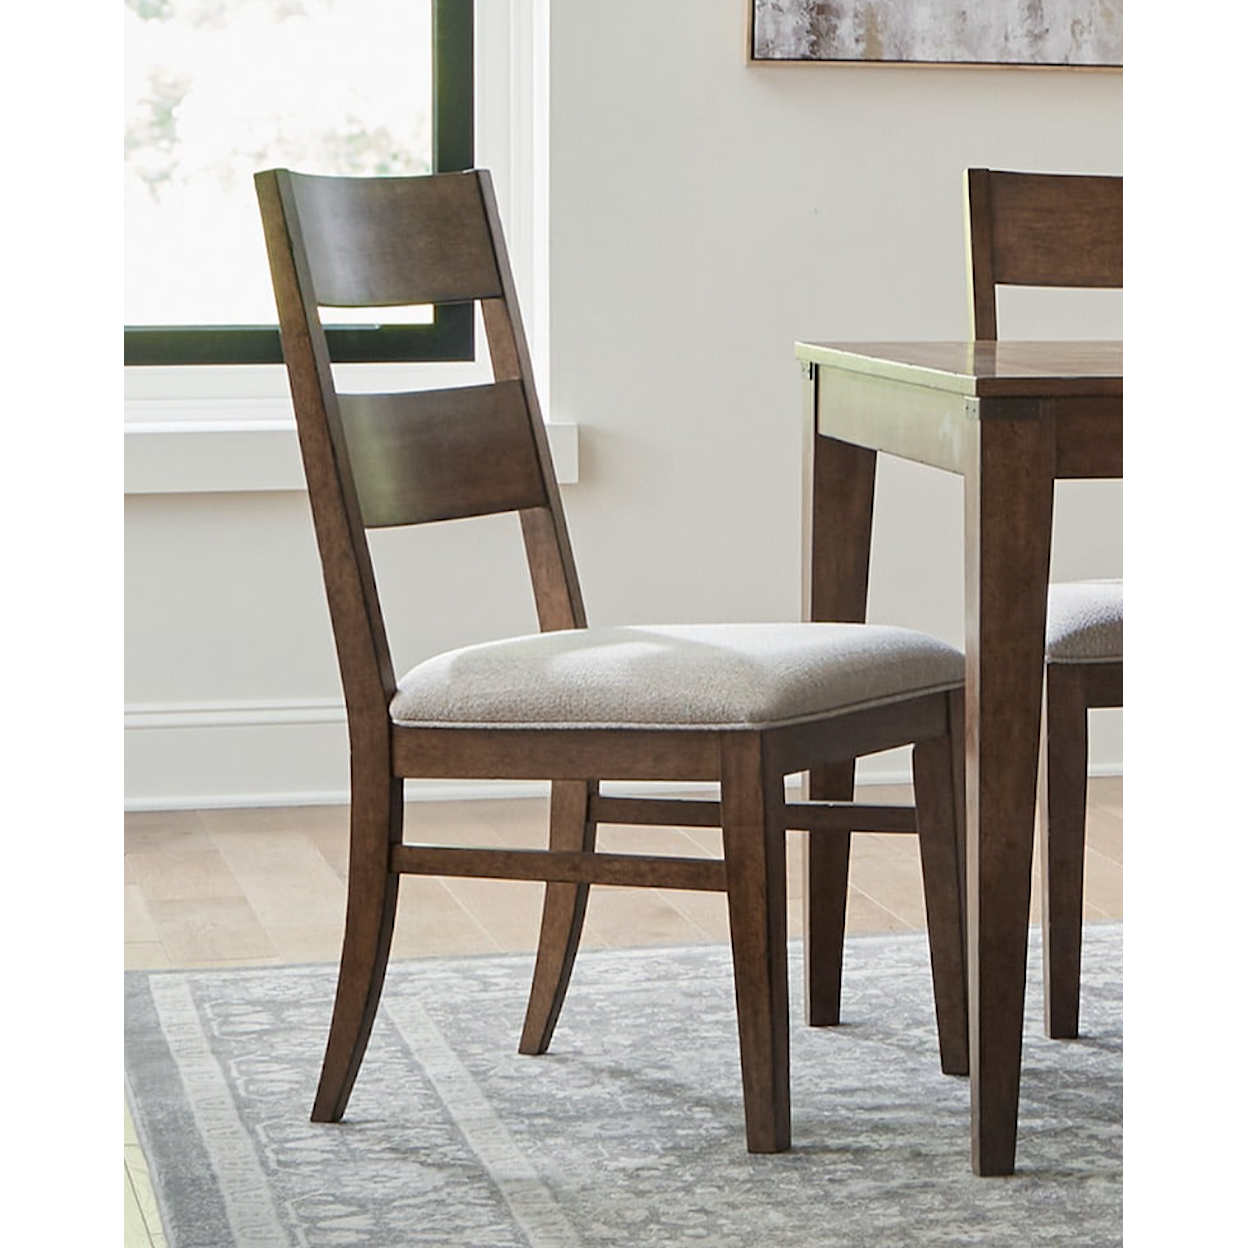 Aspenhome Asher Dining Side Chair